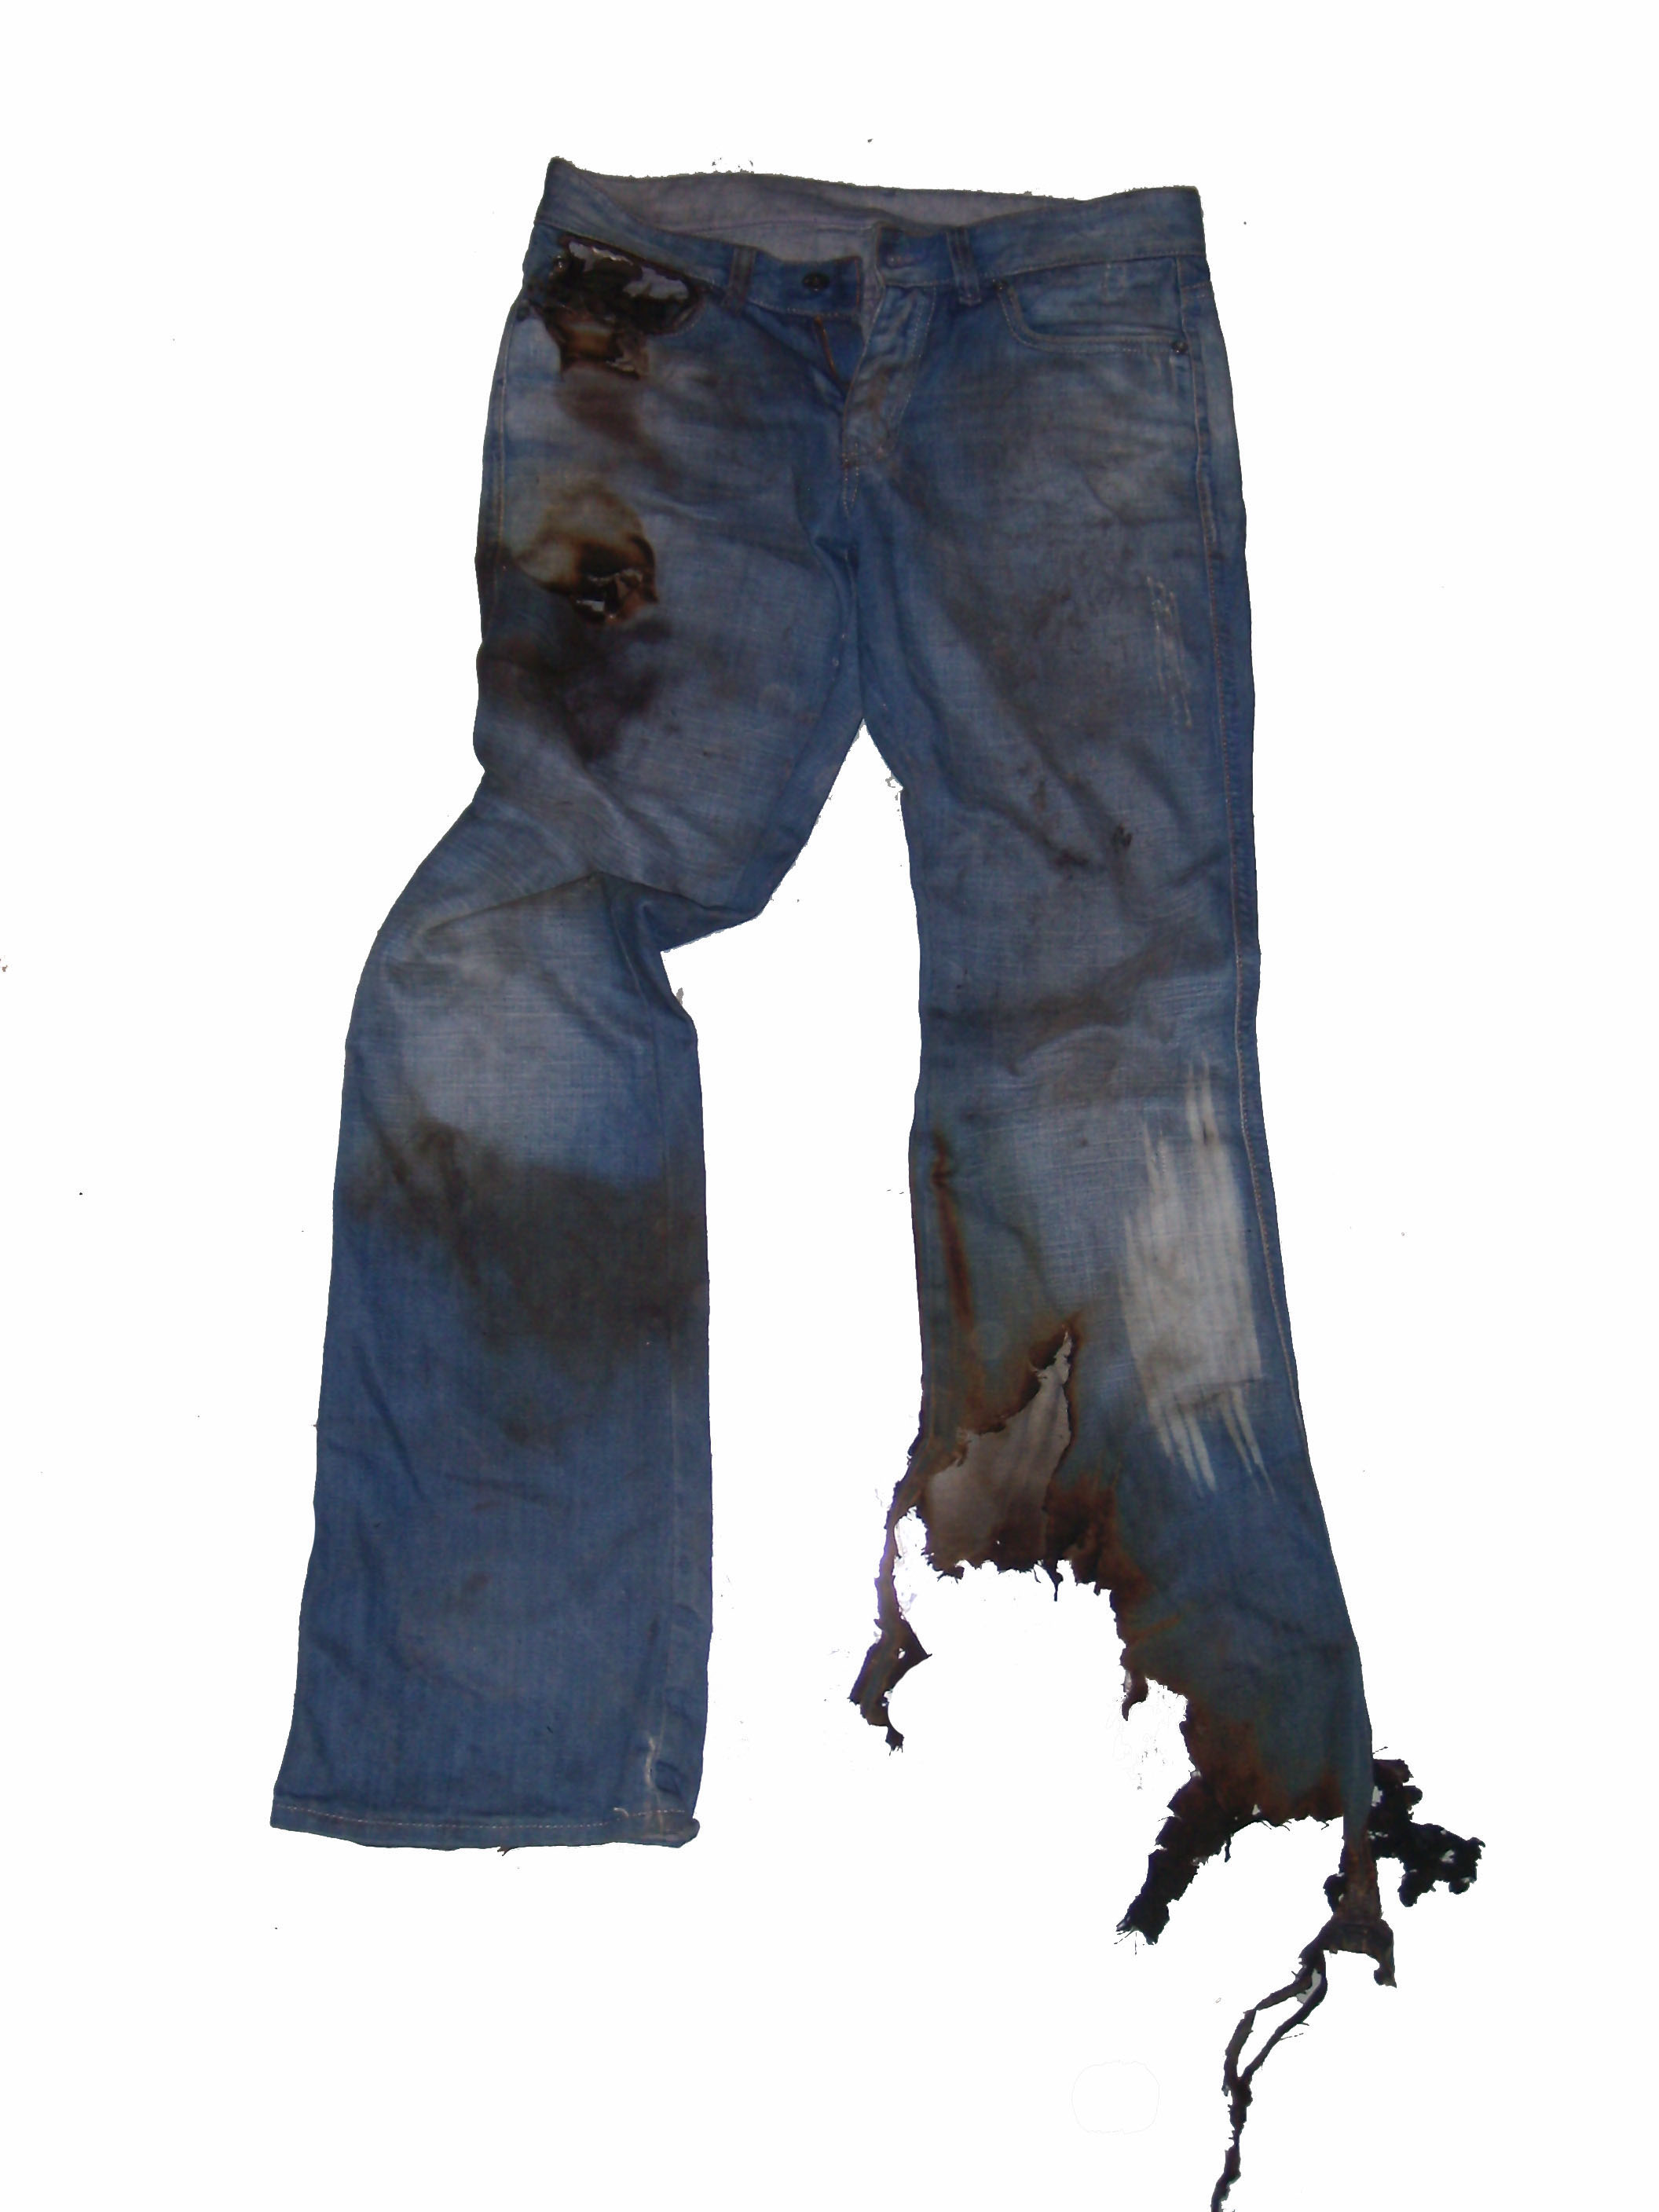 Ruined Jeans | Outboard Motor Oil